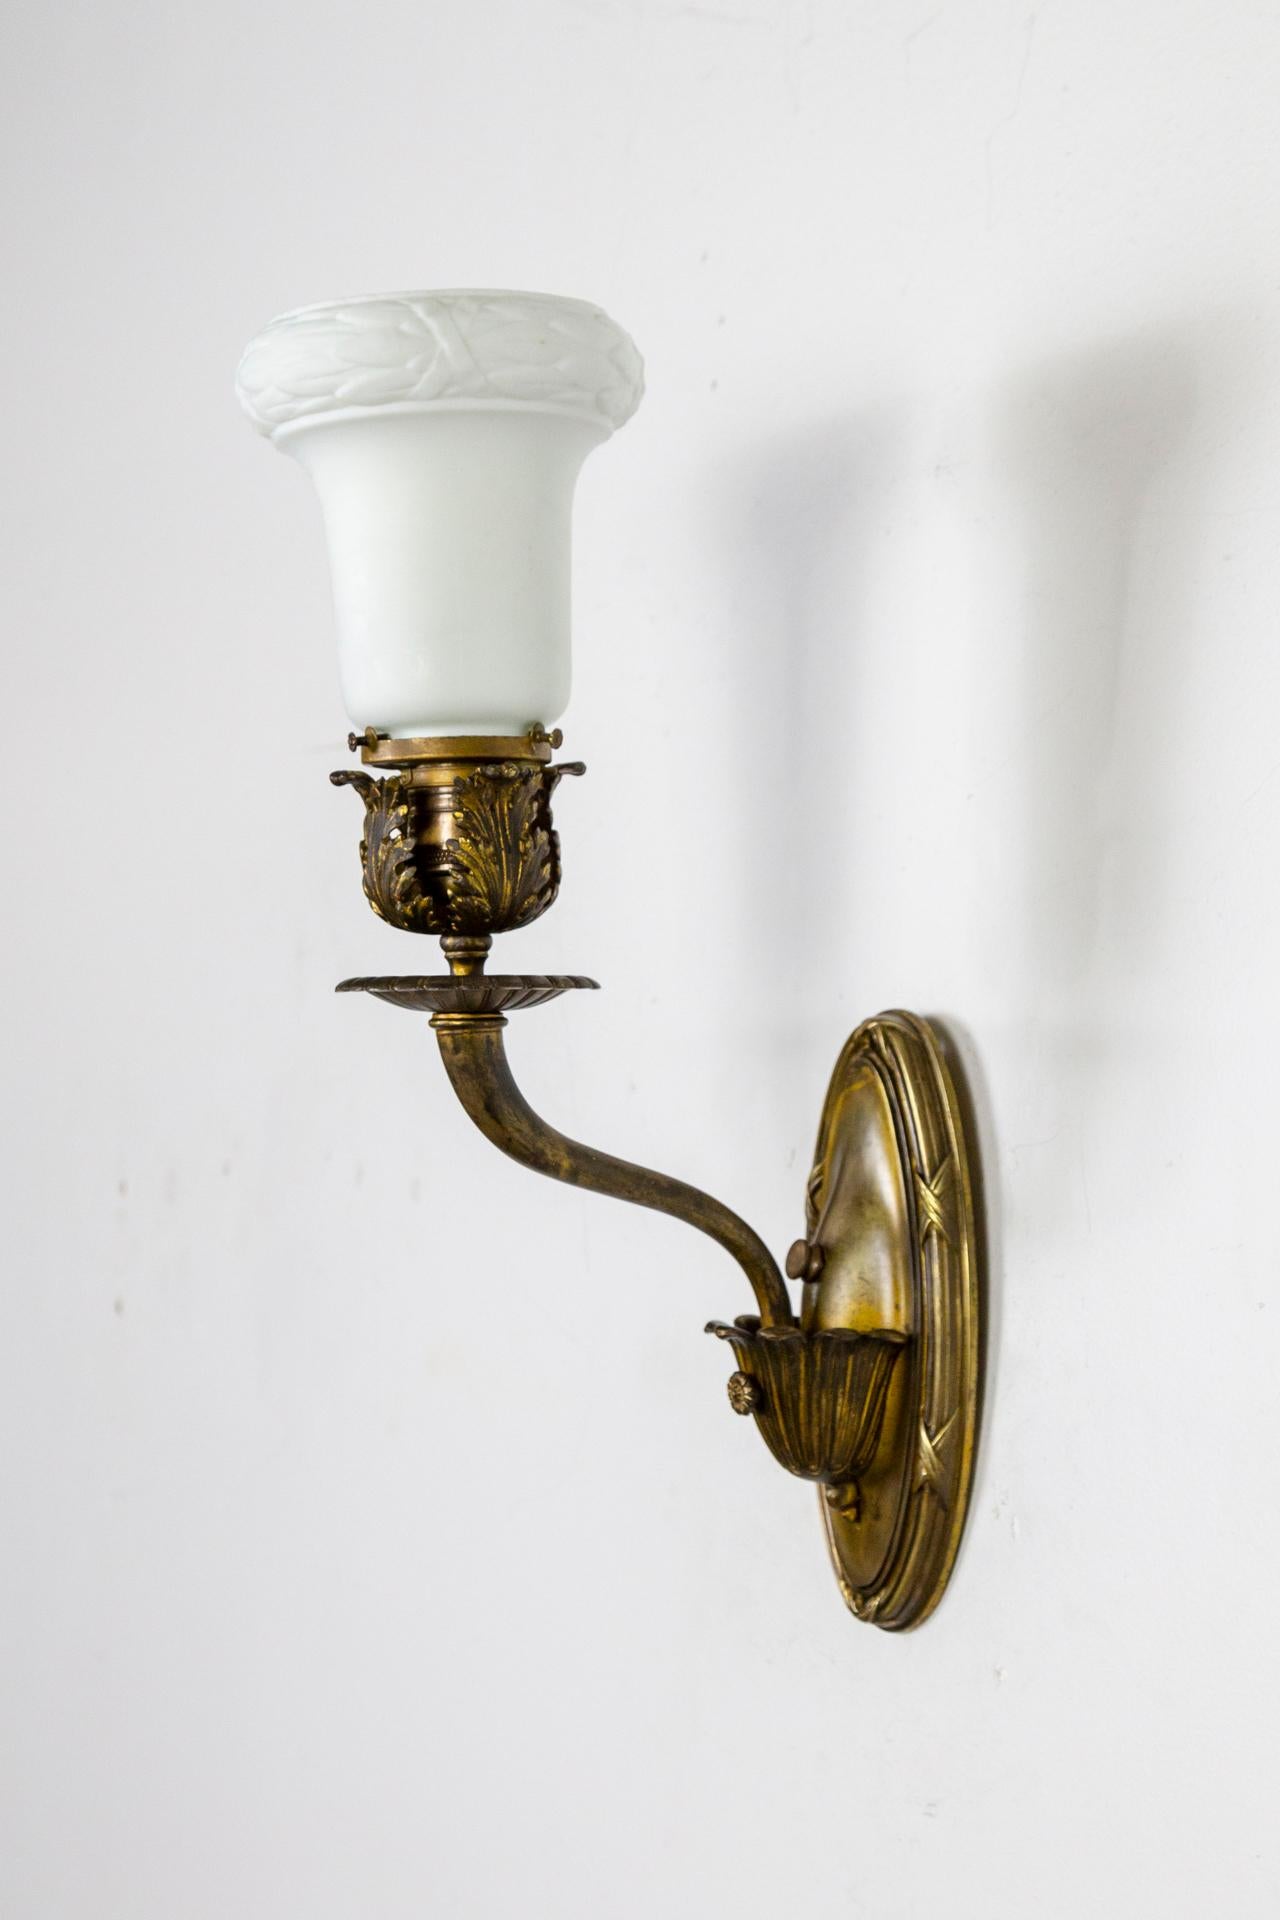 19th Cent, Armed Sconces w/ Neoclassical Details & Milk Glass Shades, 'Pair' For Sale 1